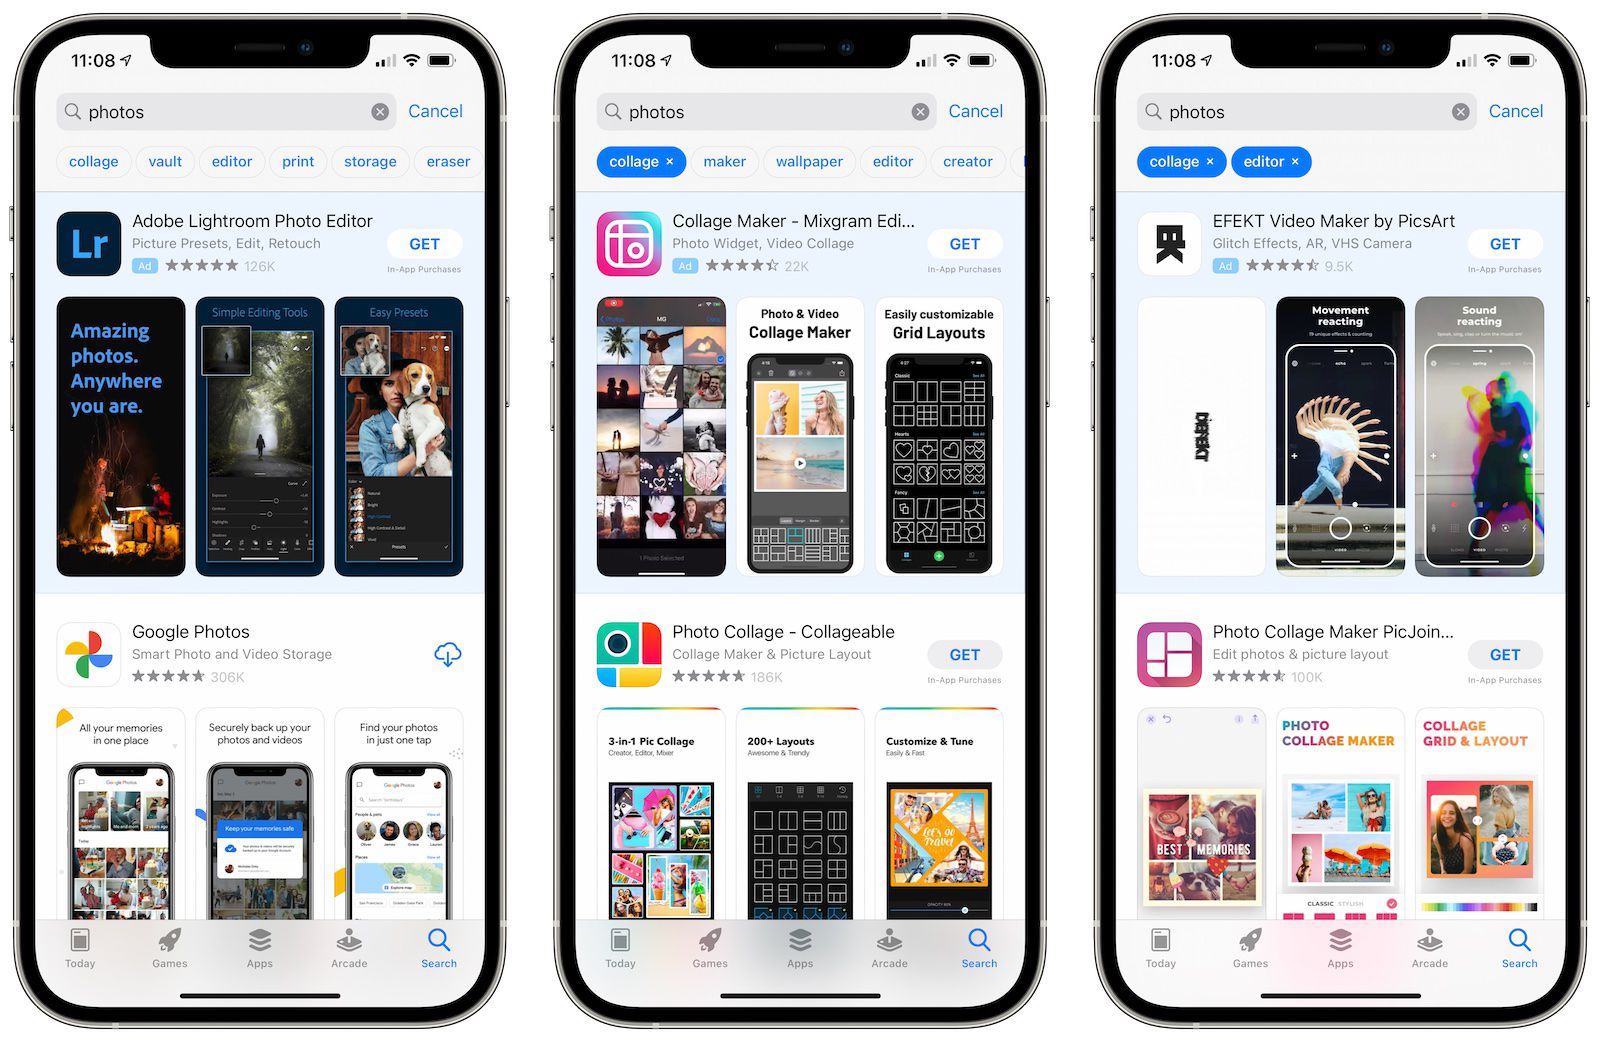 App Store Now Offers Search Suggestions - MacRumors